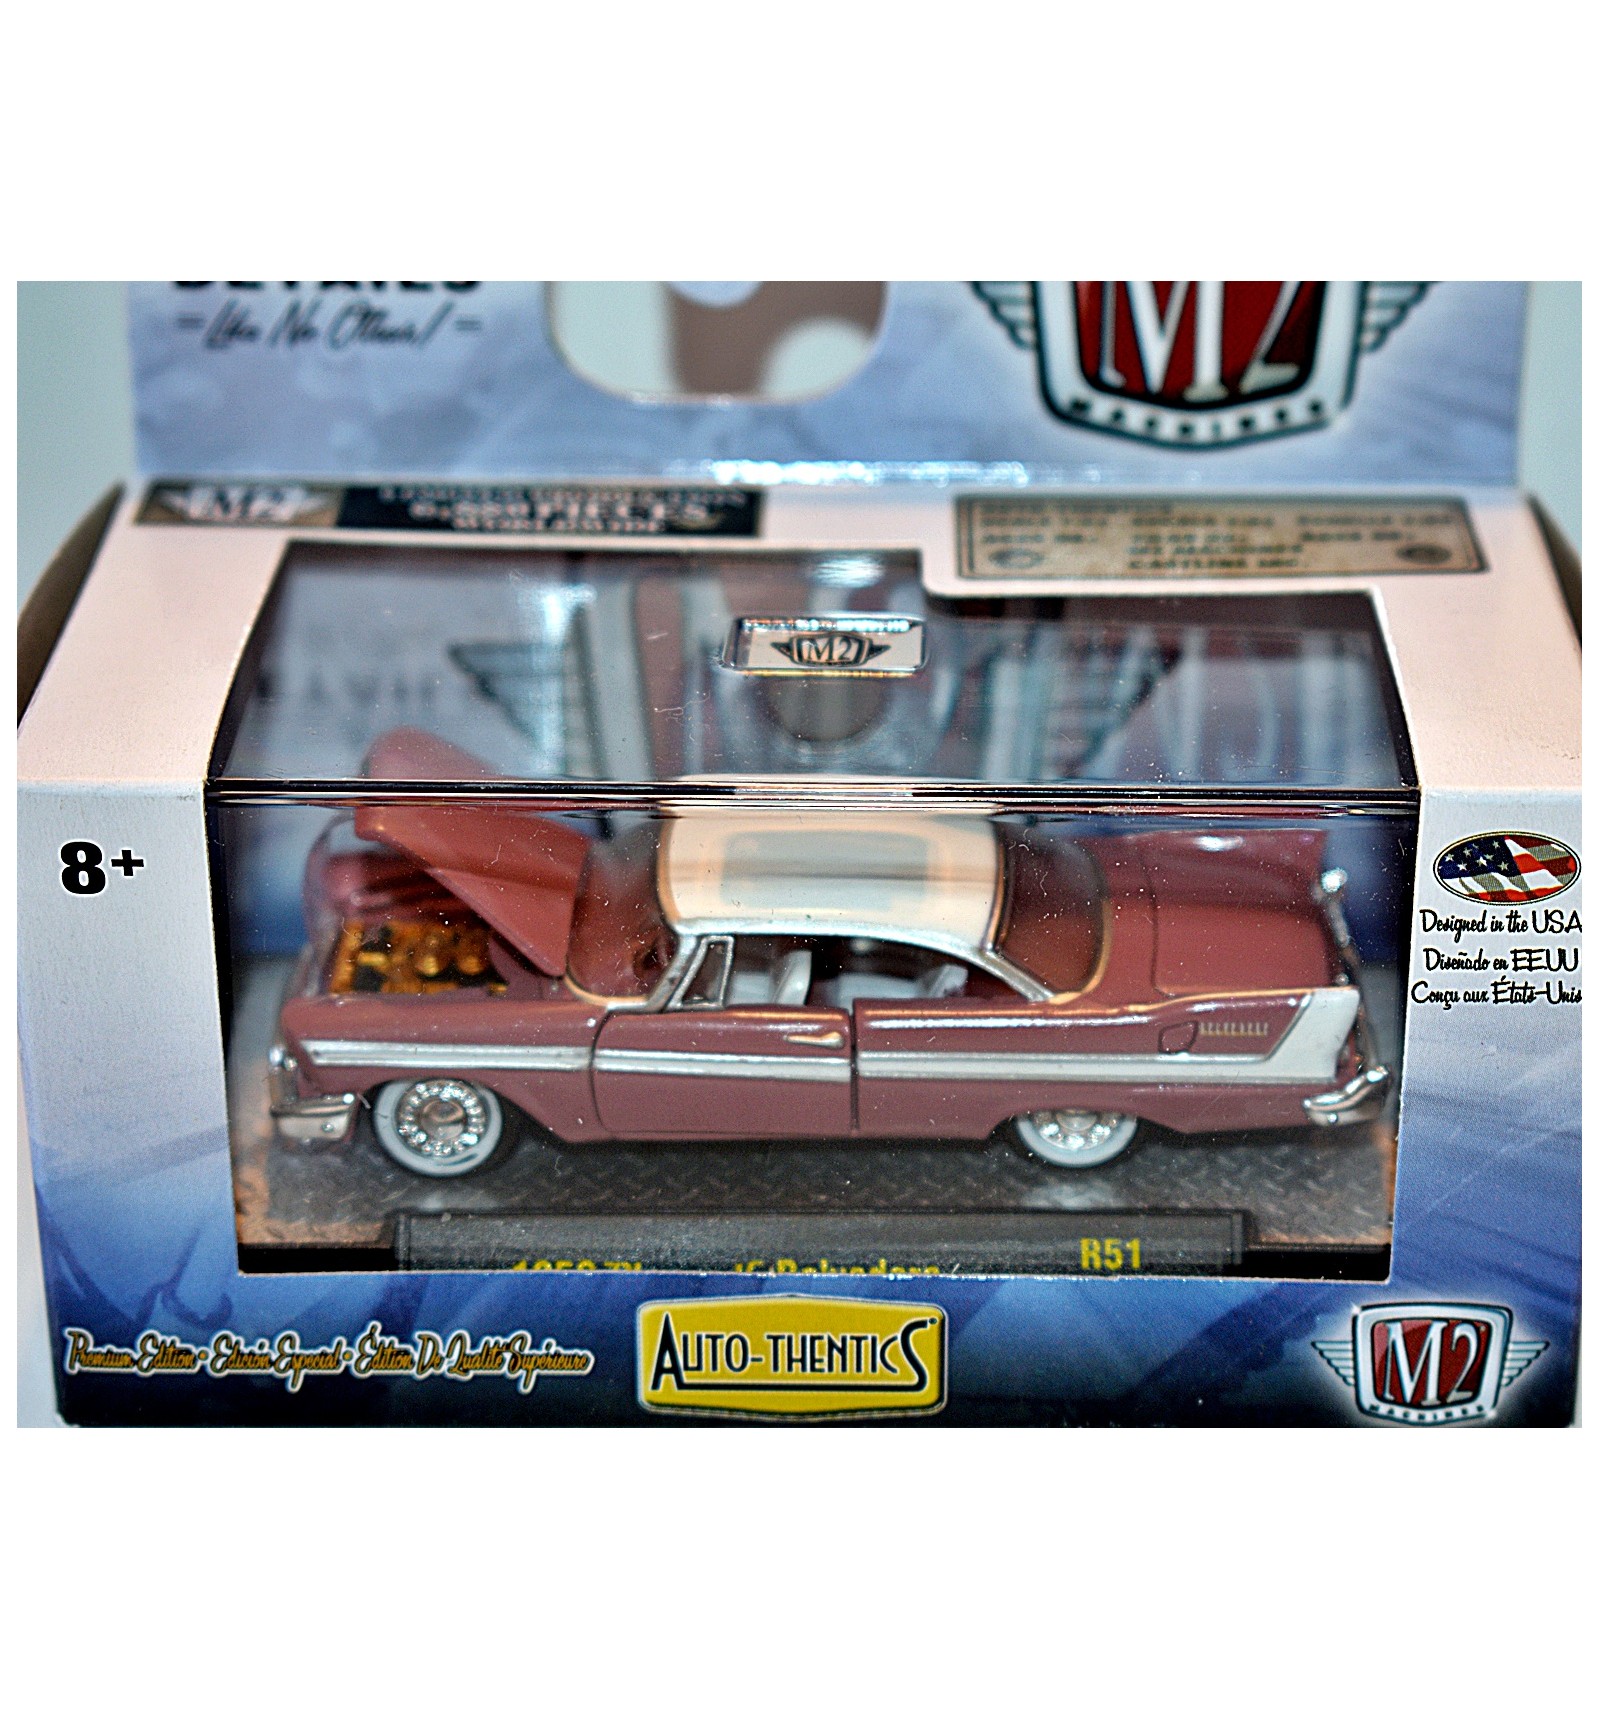 M2 Machines Auto Thentics Release 51 1958 Plymouth Belvedere Car R51